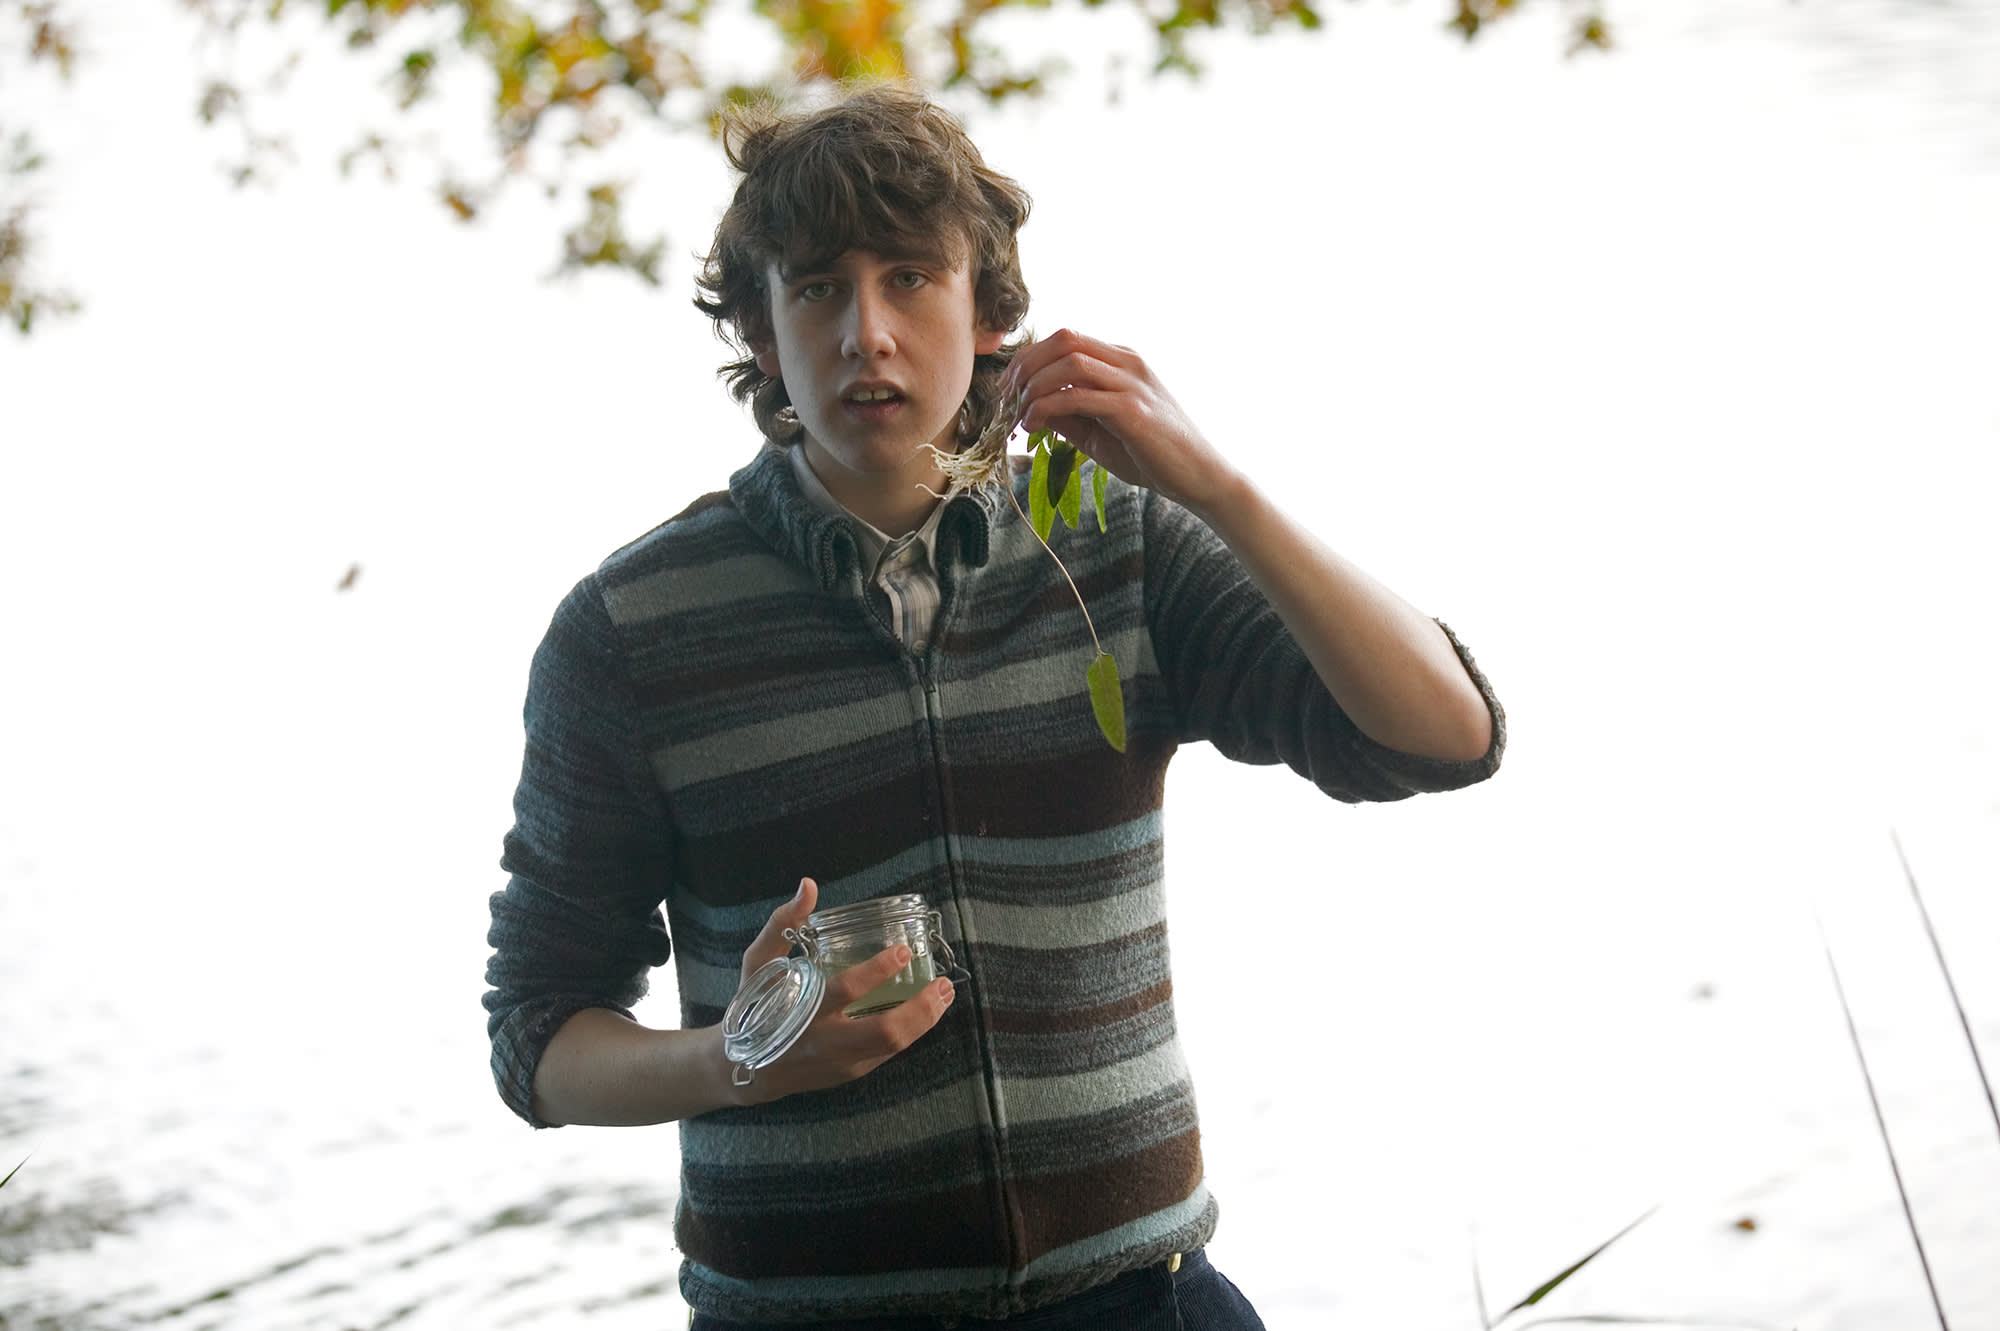 Neville Longbottom stands at the edge of the lake while holding up a plant